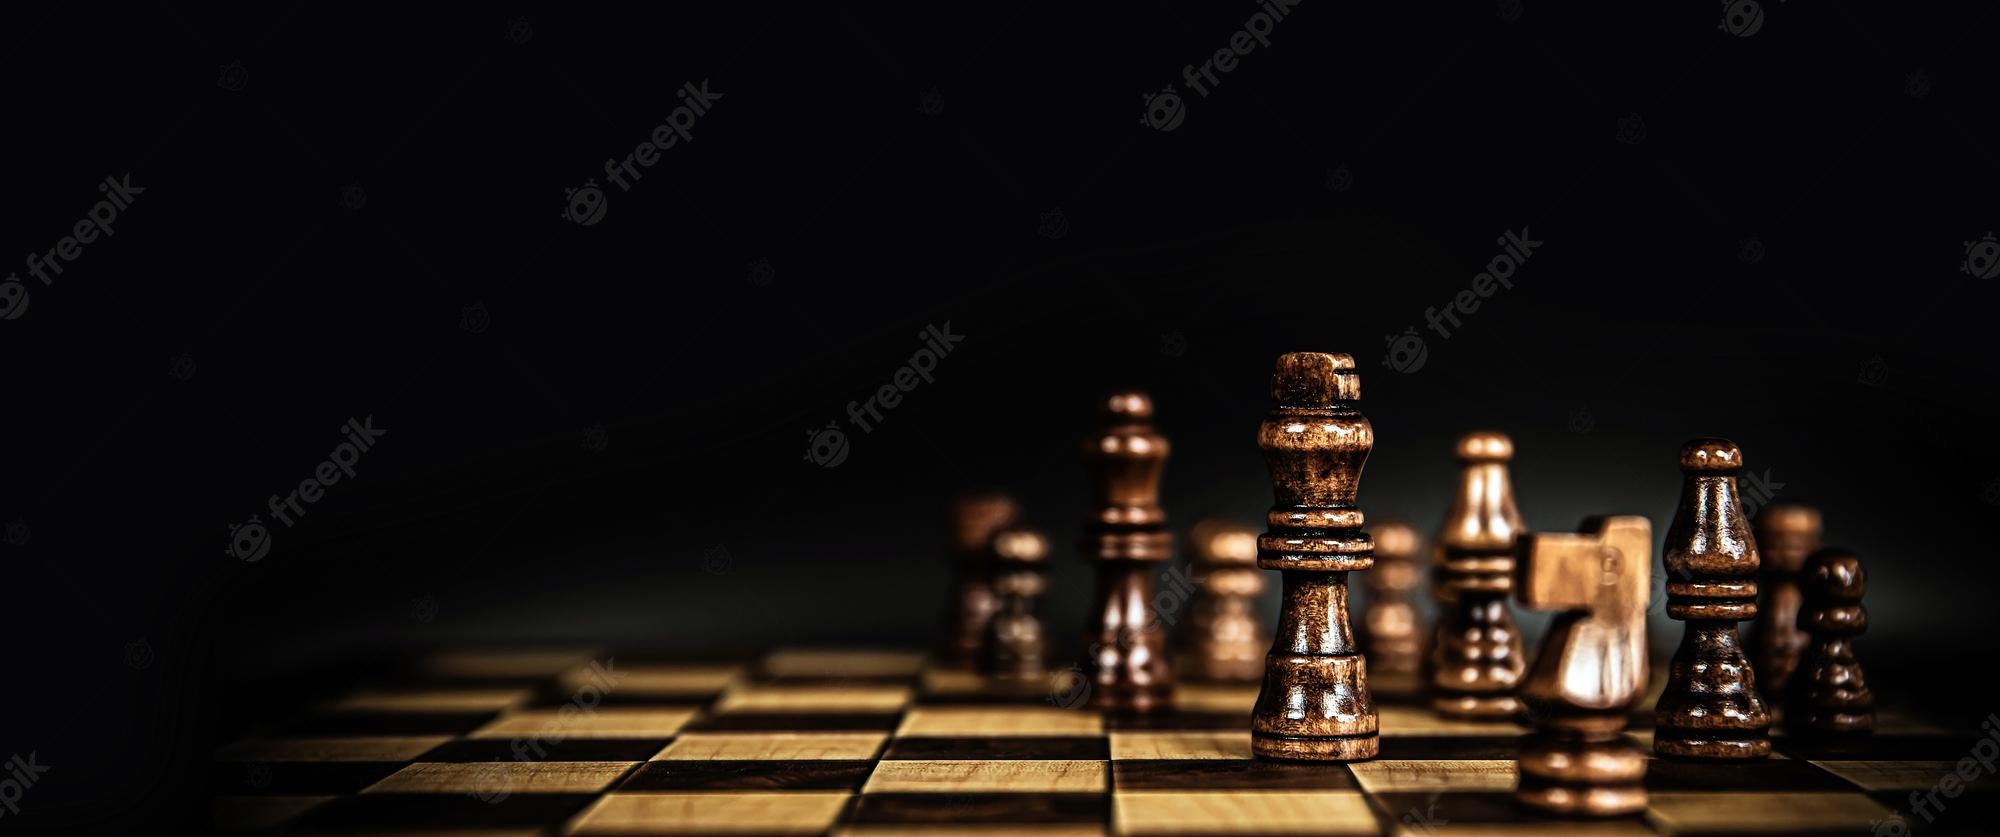 Chess Player Image. Free Vectors, & PSD